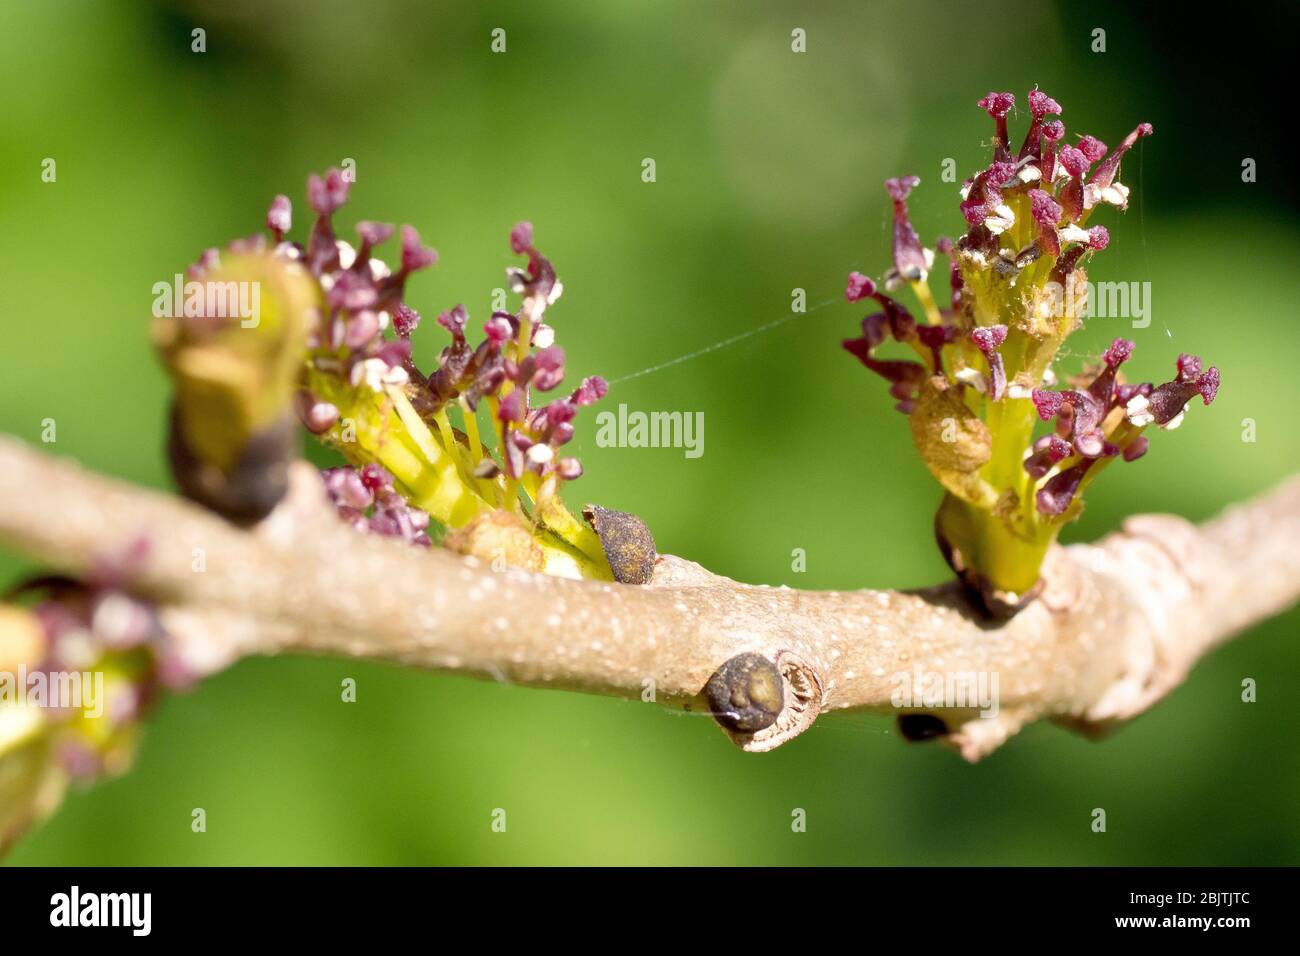 Ash (fraxinus excelsior), close up of the flowers bursting into life in the spring, isolated against a plain out of focus background. Stock Photo